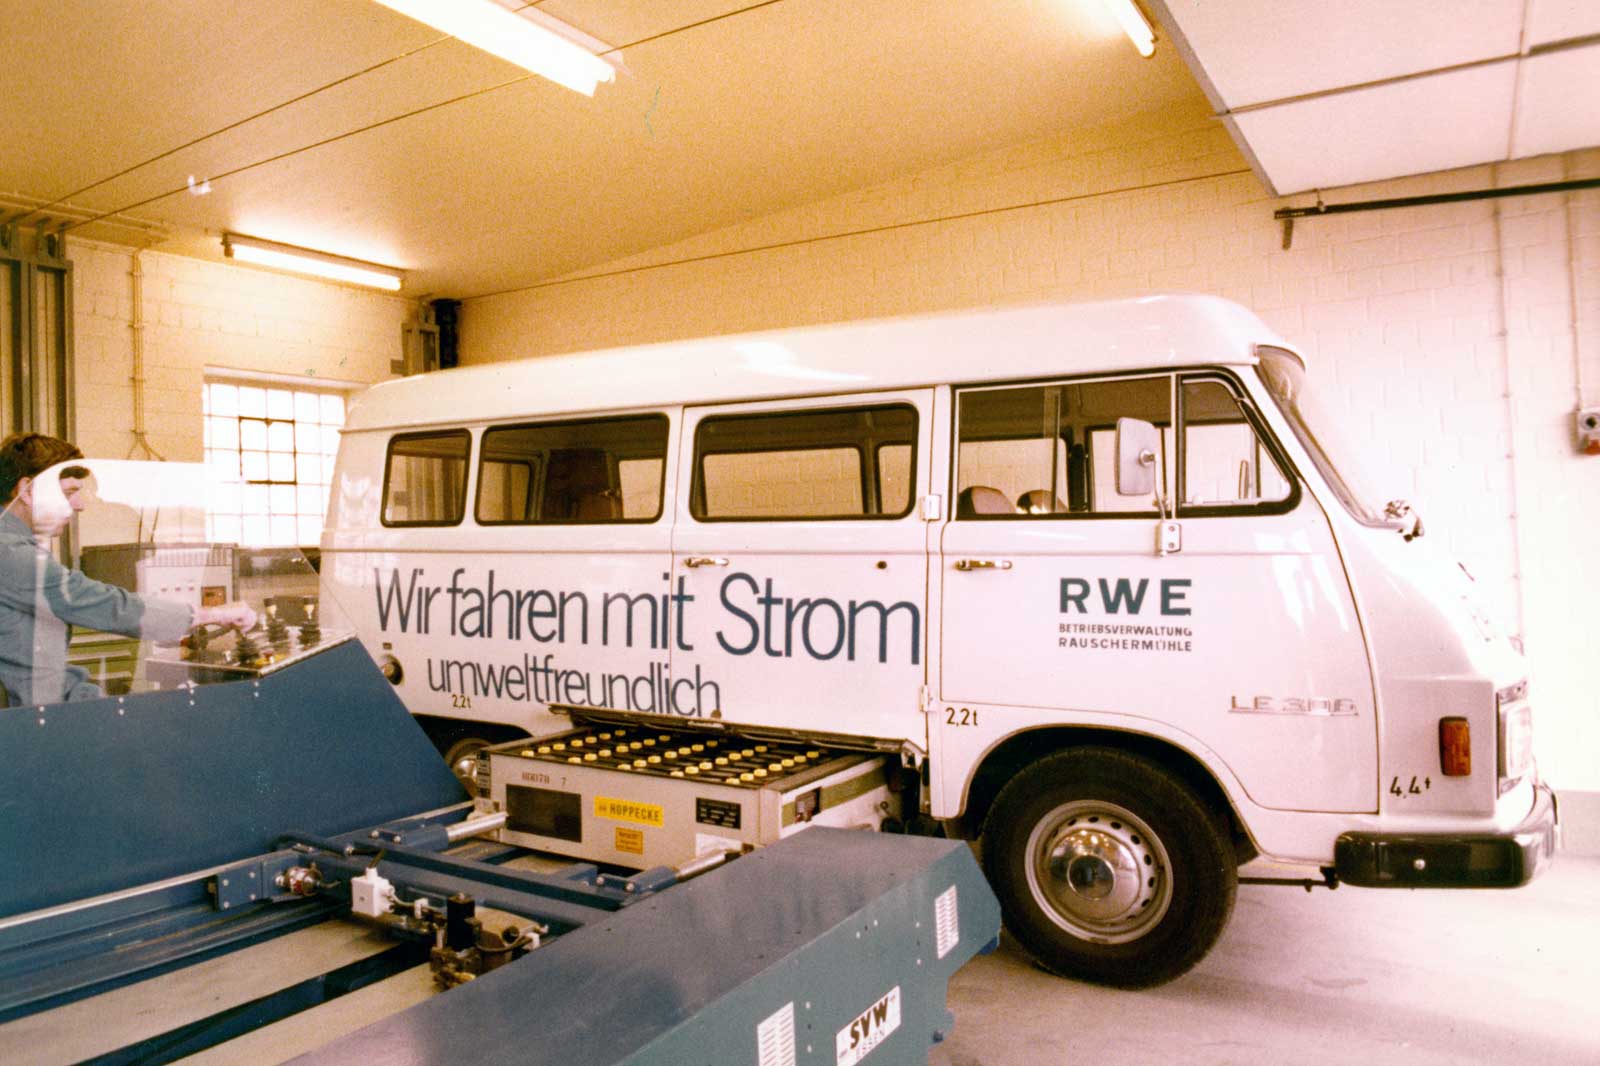 Changing the battery of an RWE electric van, 1977